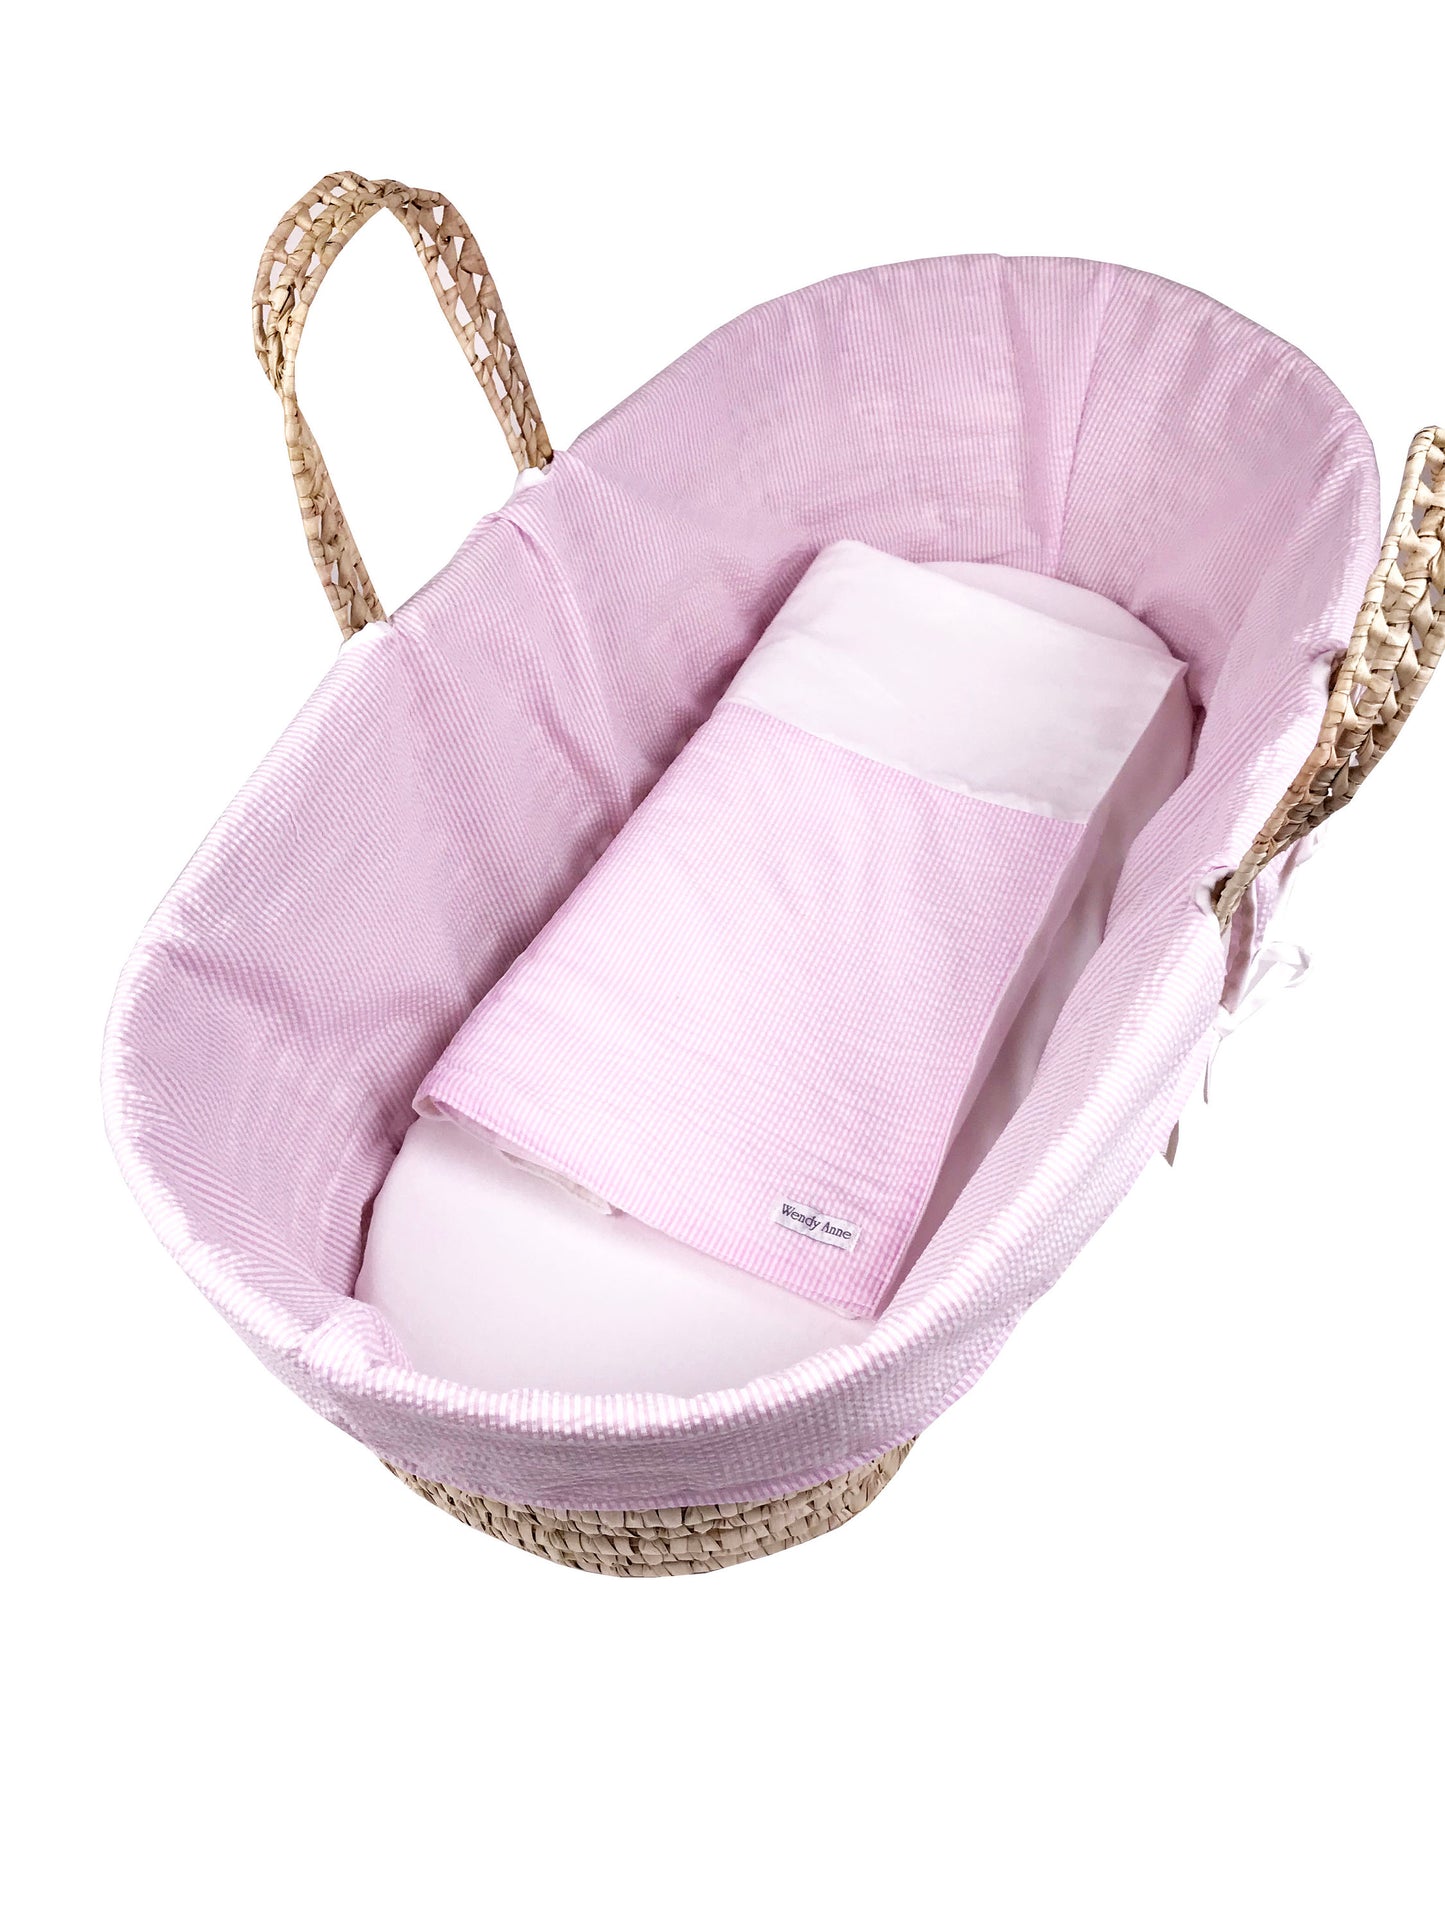 Simple Moses Basket Bedding Set - Made for Your Moses Basket - Choose Fabric